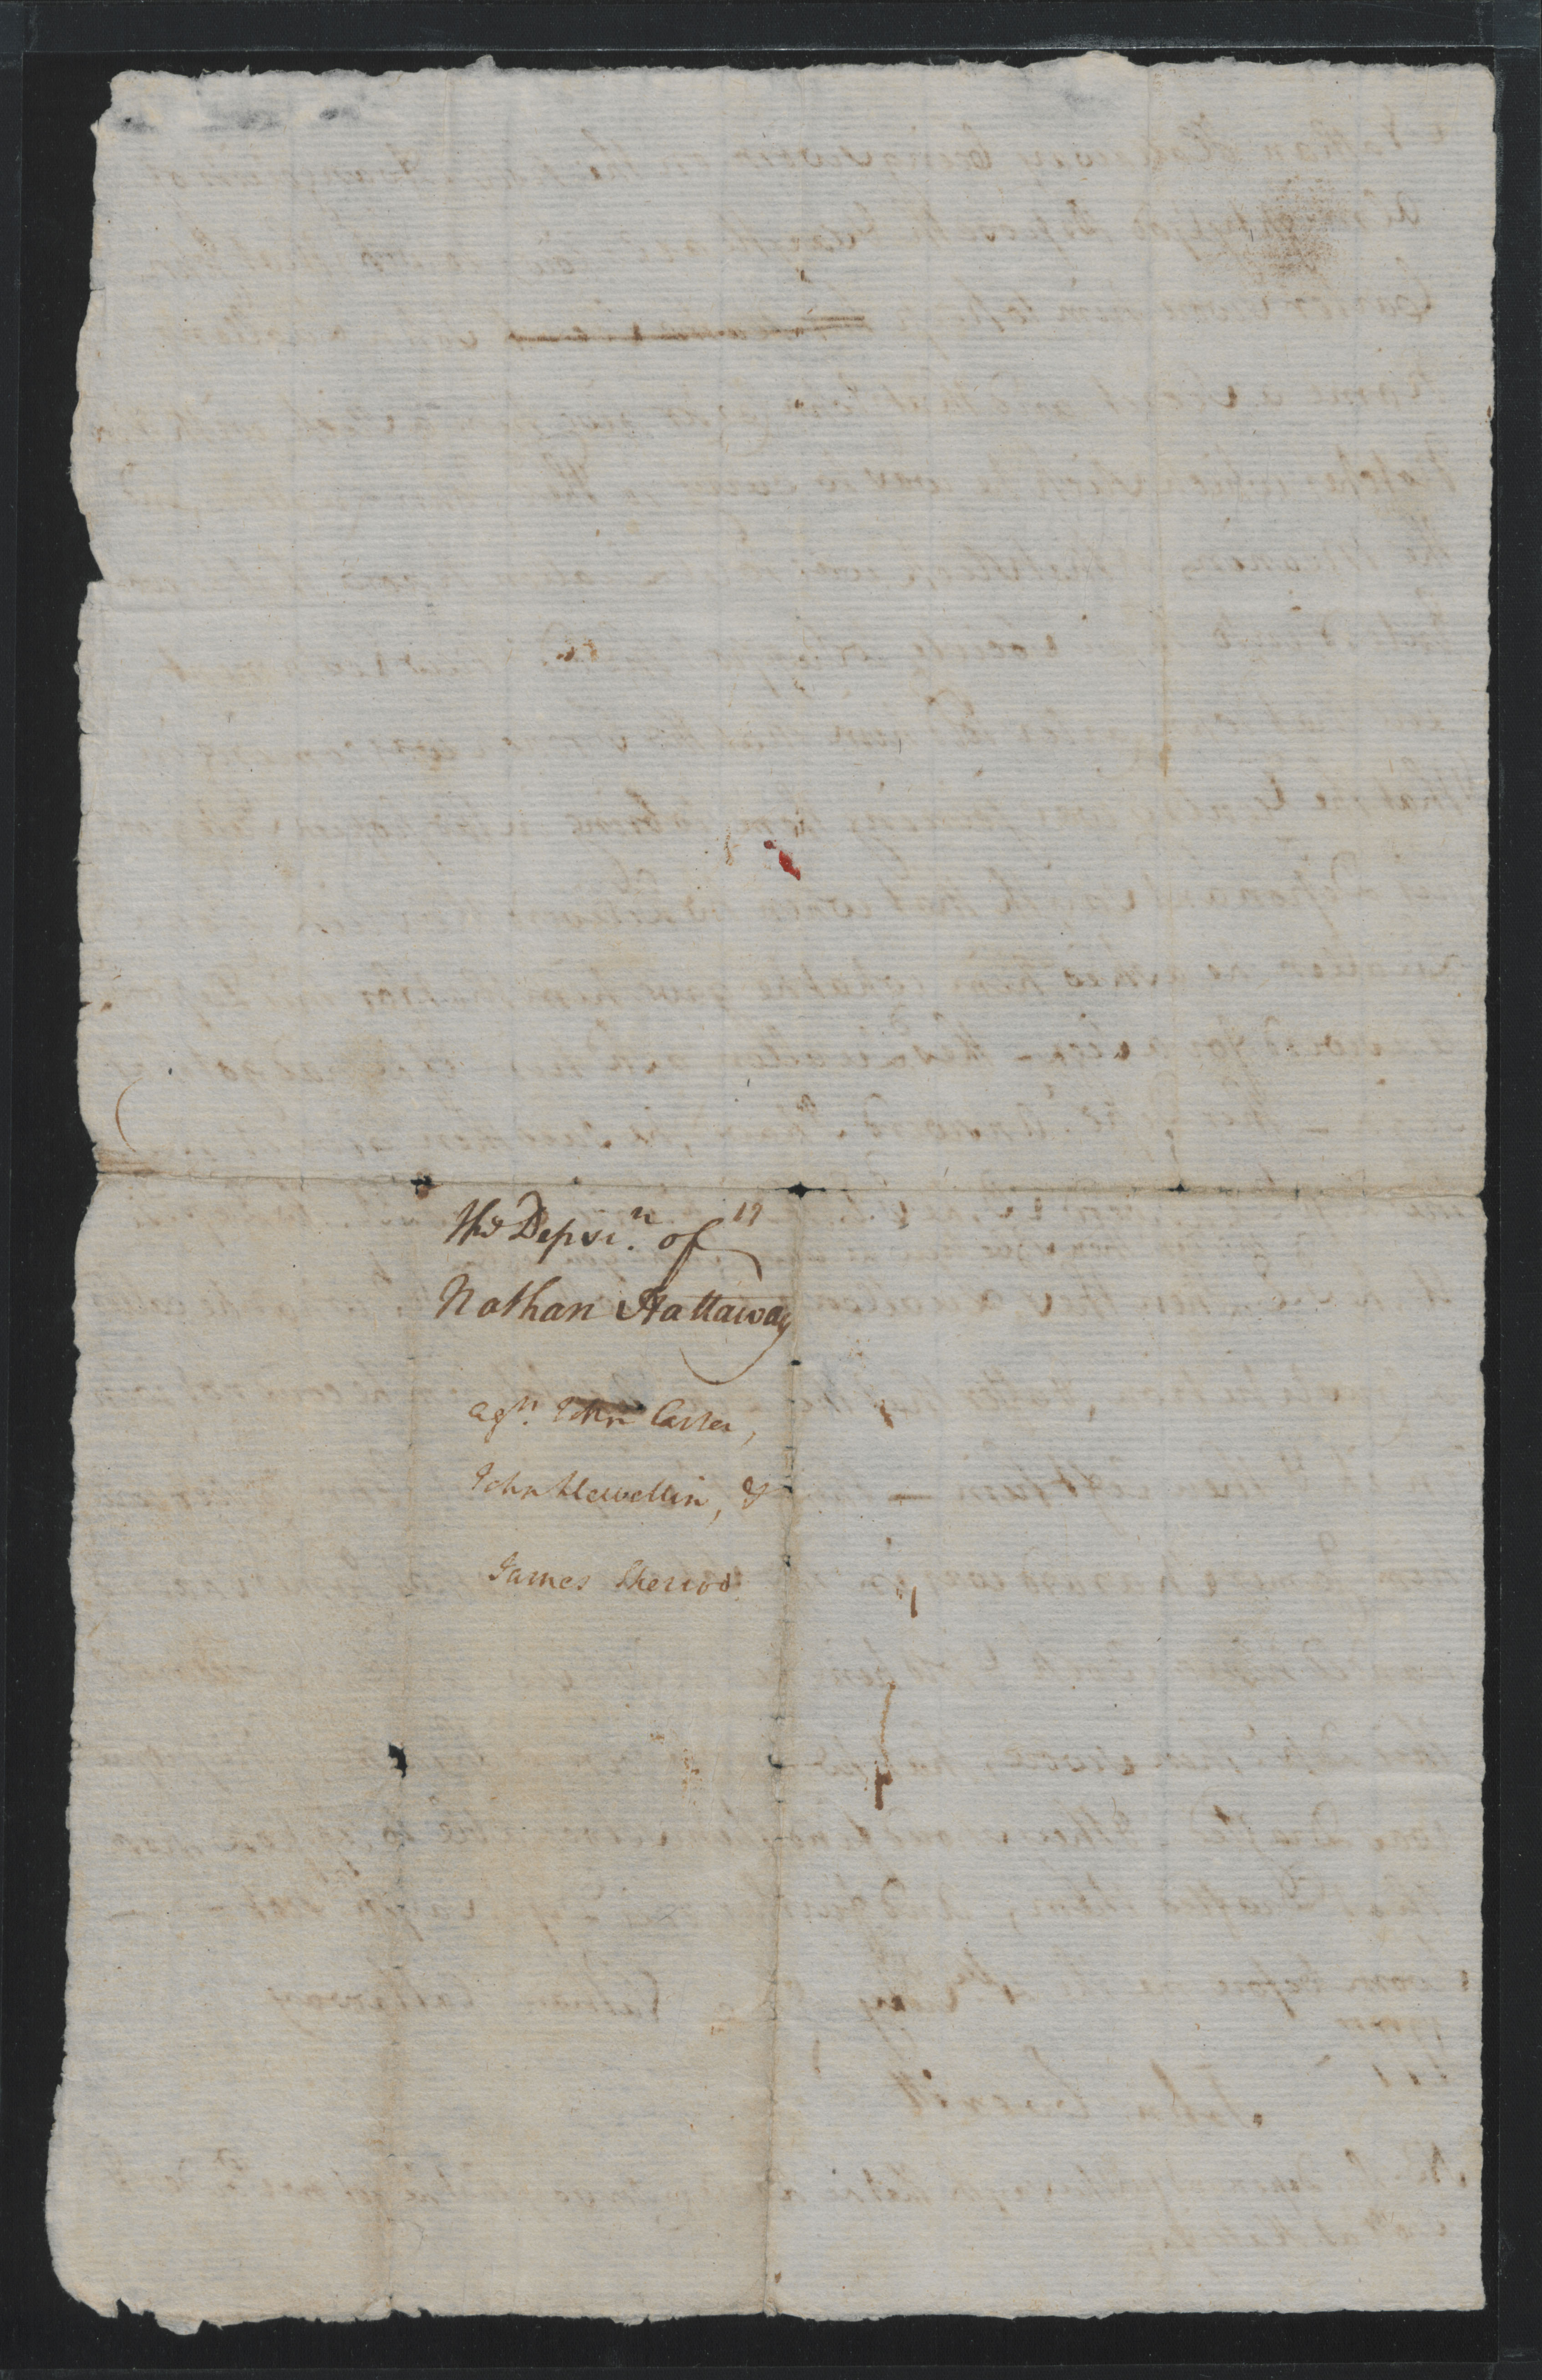 Deposition of Nathan Hallaway, 4 July 1777, page 2